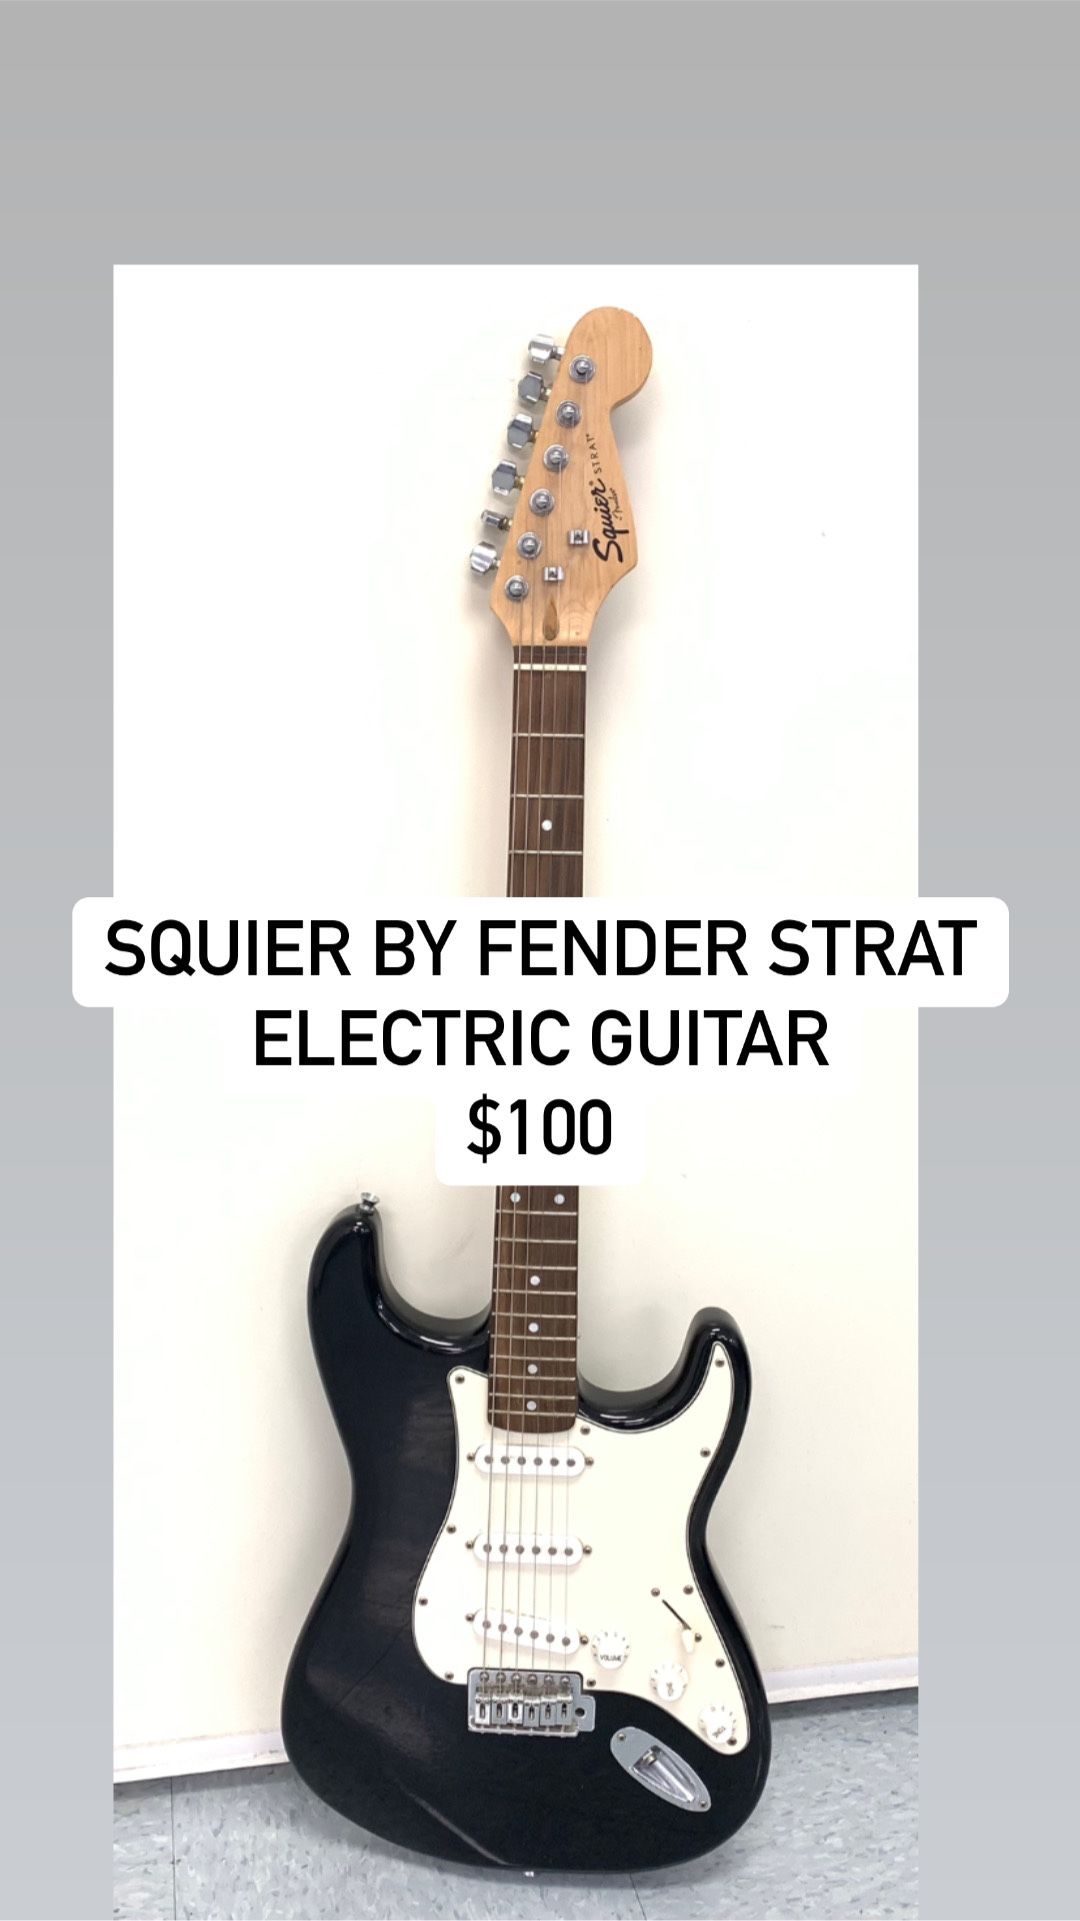 Squier By Fender Strat Electric Guitar #25466